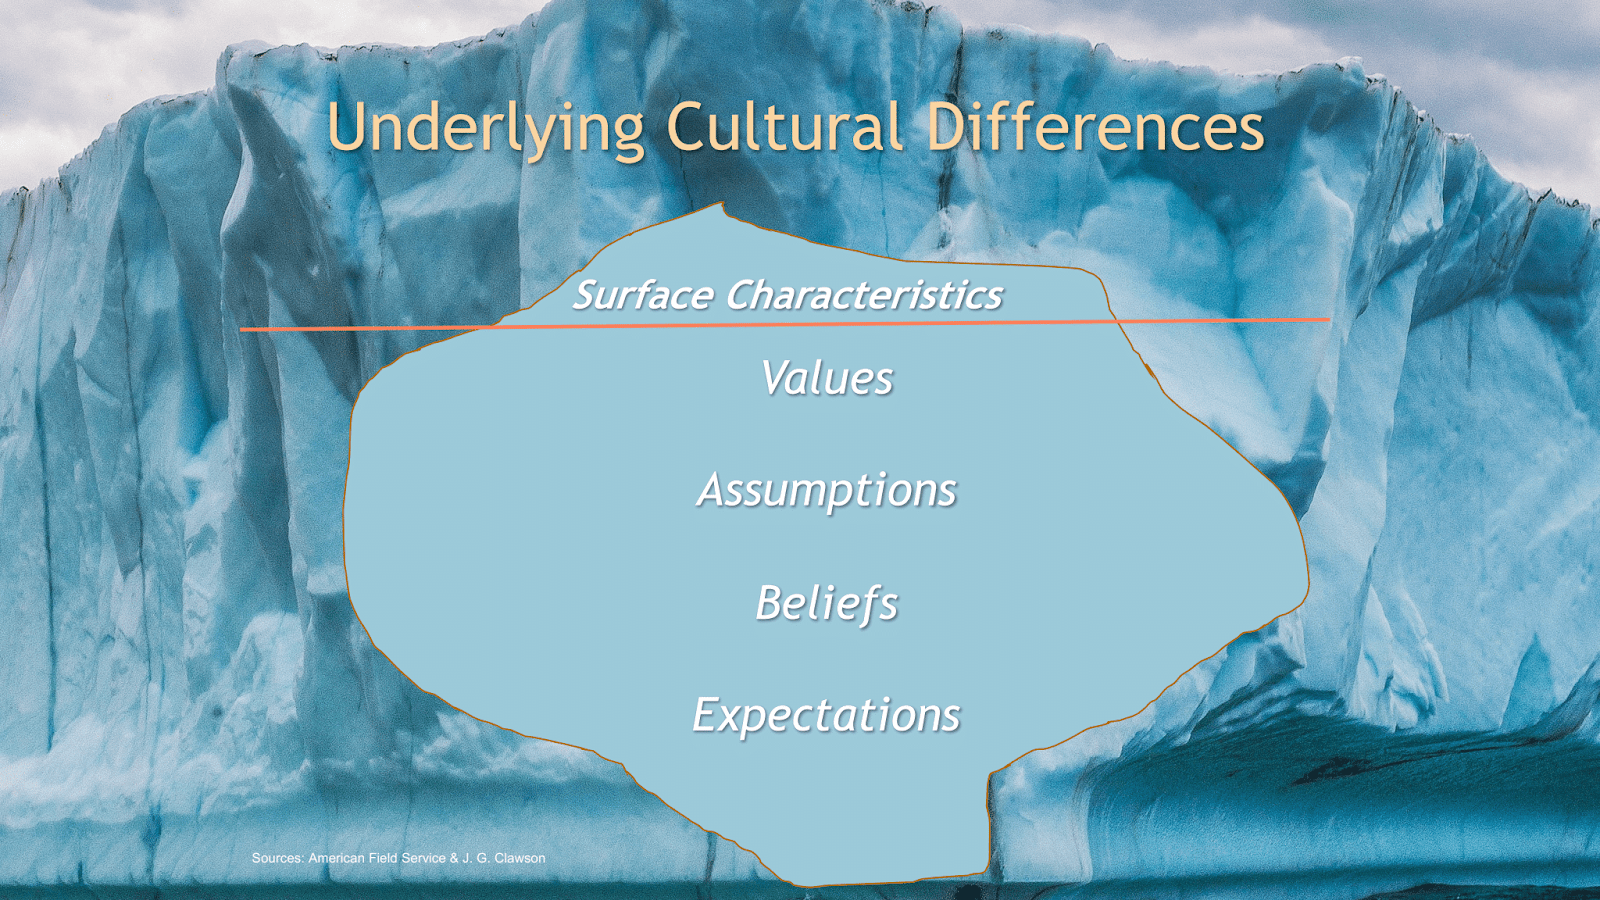 Image of an iceberg overlaid with text. Underlying cultural differences: values, assumptions, beliefs, expectations